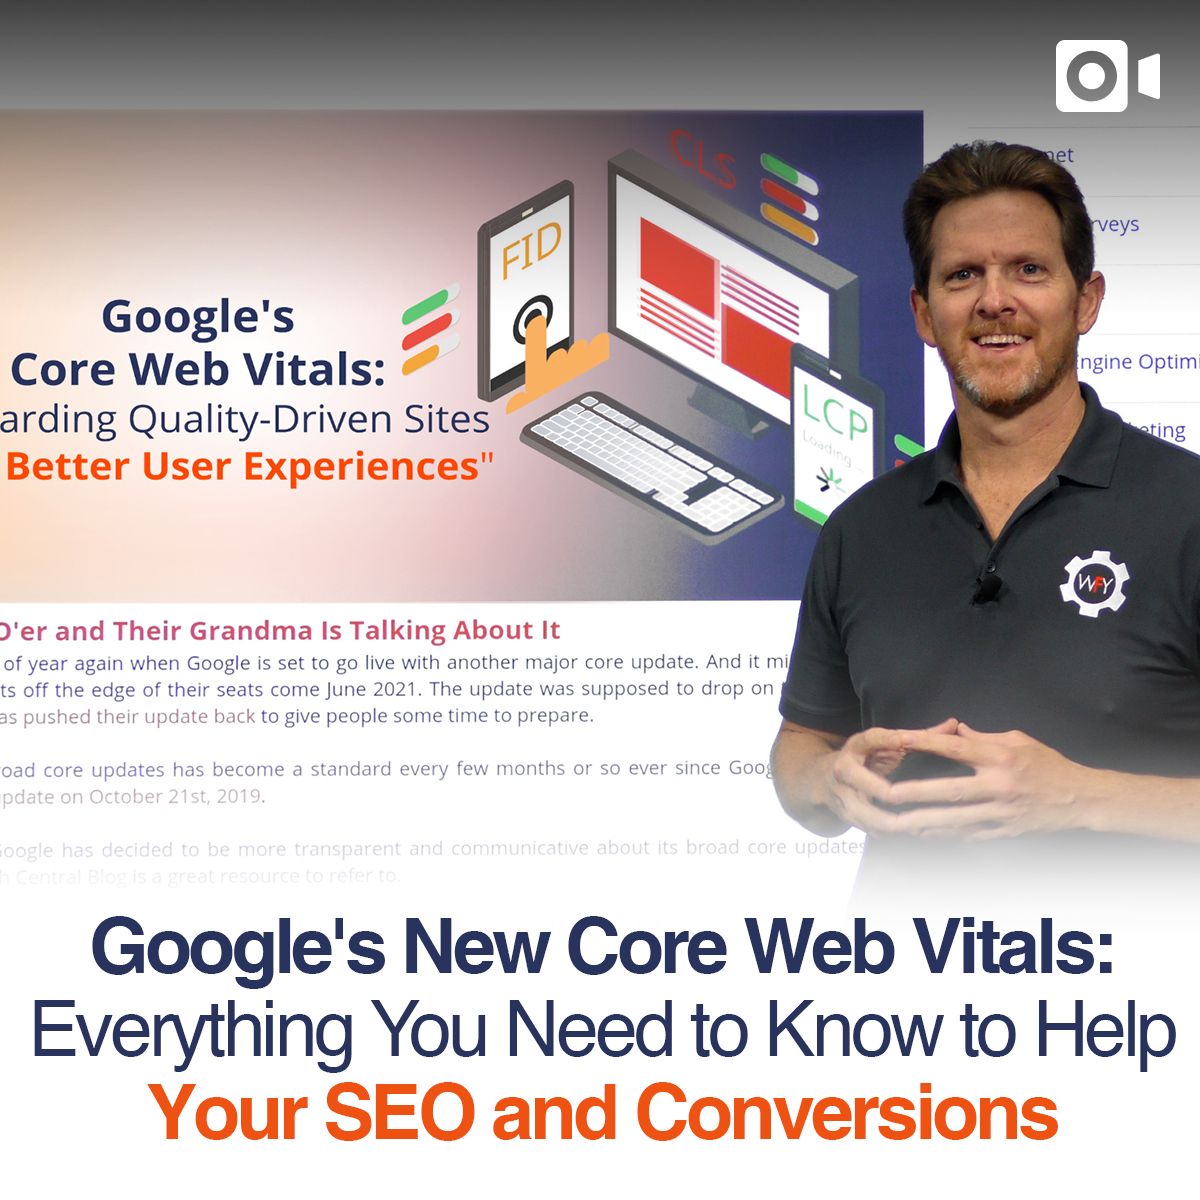 Google's New Core Web Vitals: Everything You Need to Know to Help Your SEO and Conversions